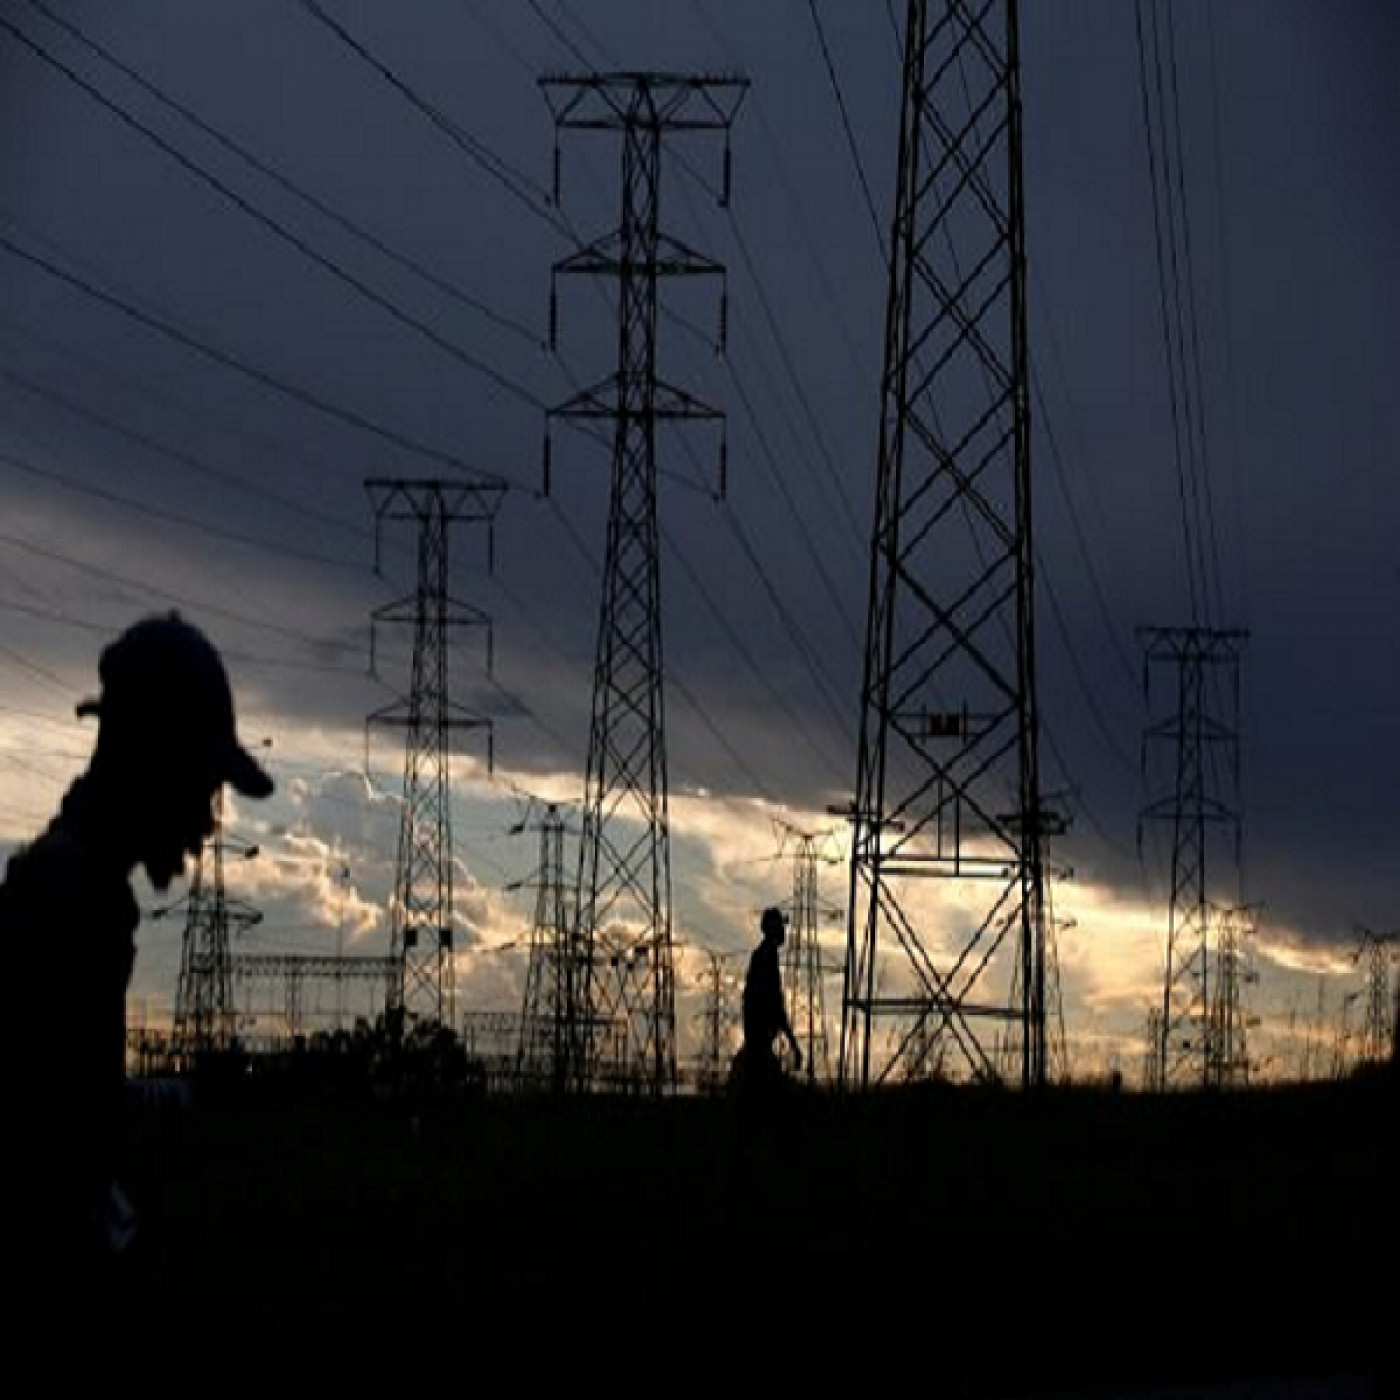 Load shedding will continue to affect water supply in Johannesburg